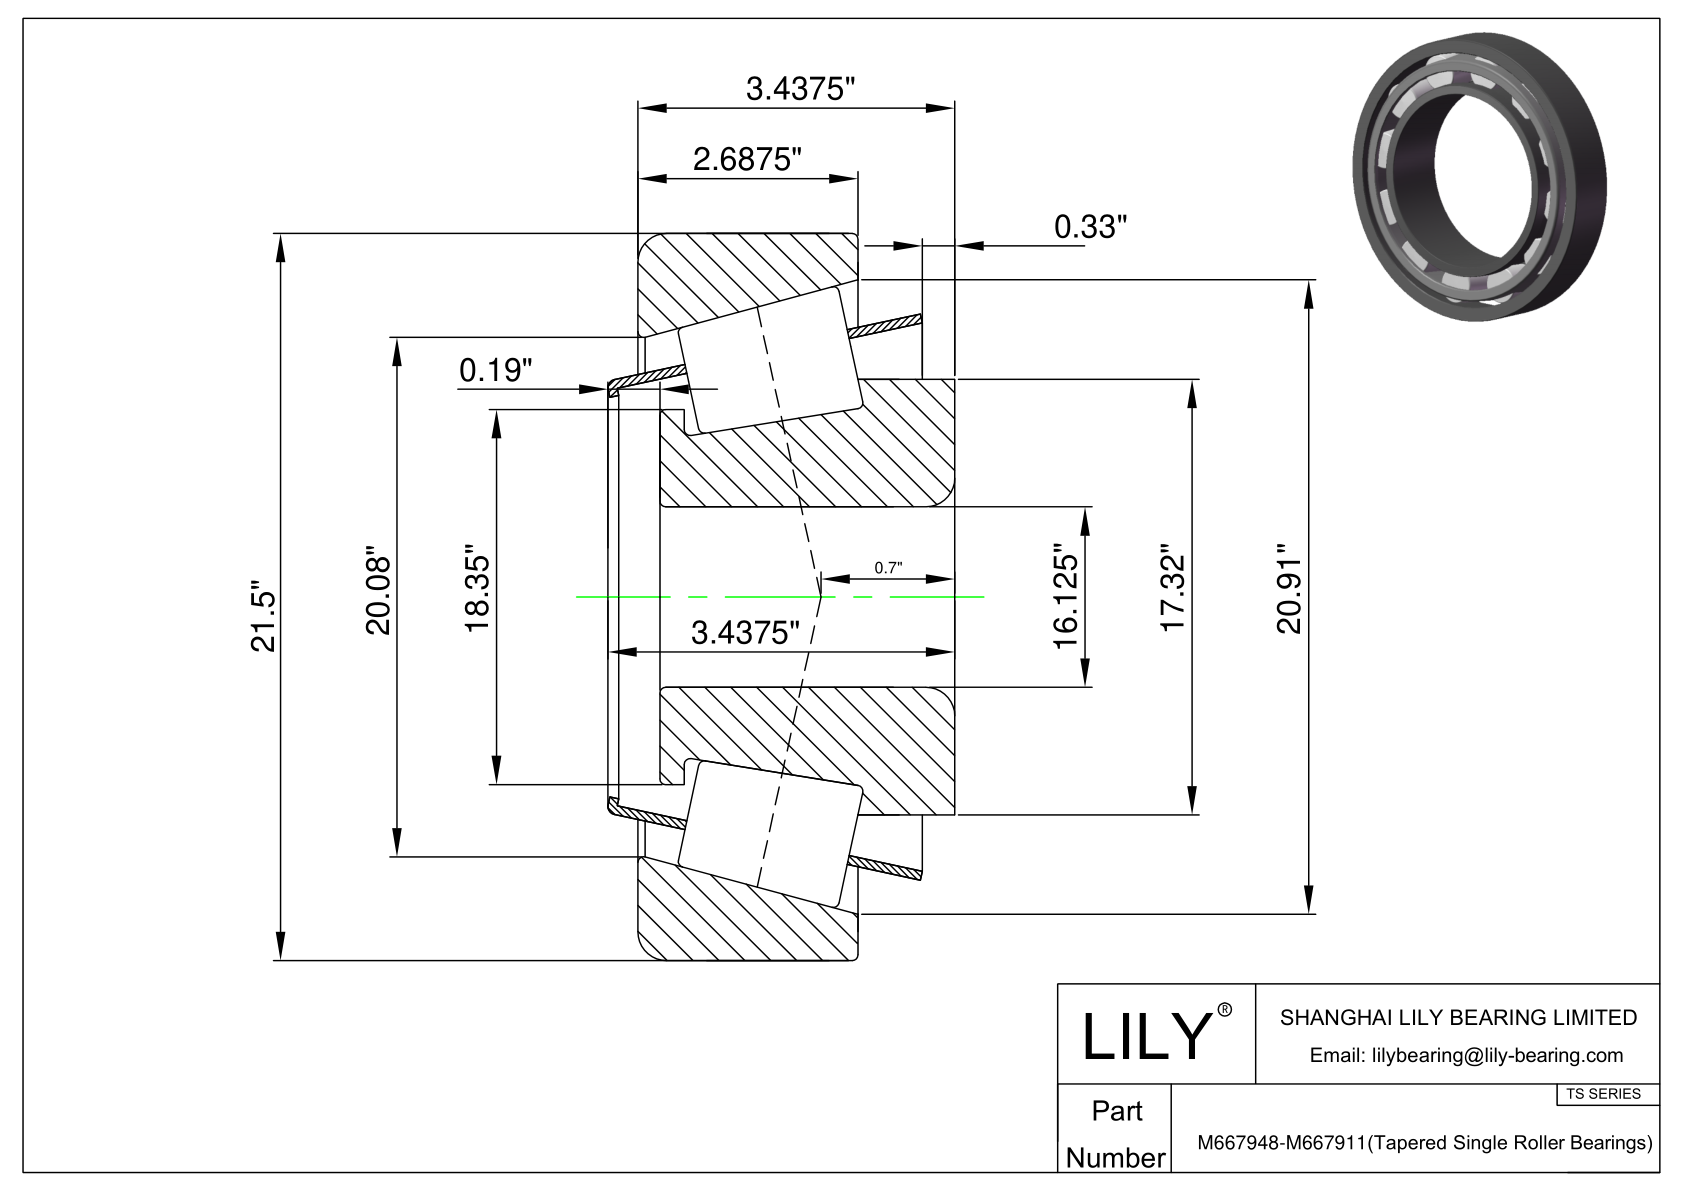 M667948-M667911 TS (Tapered Single Roller Bearings) (Imperial) cad drawing